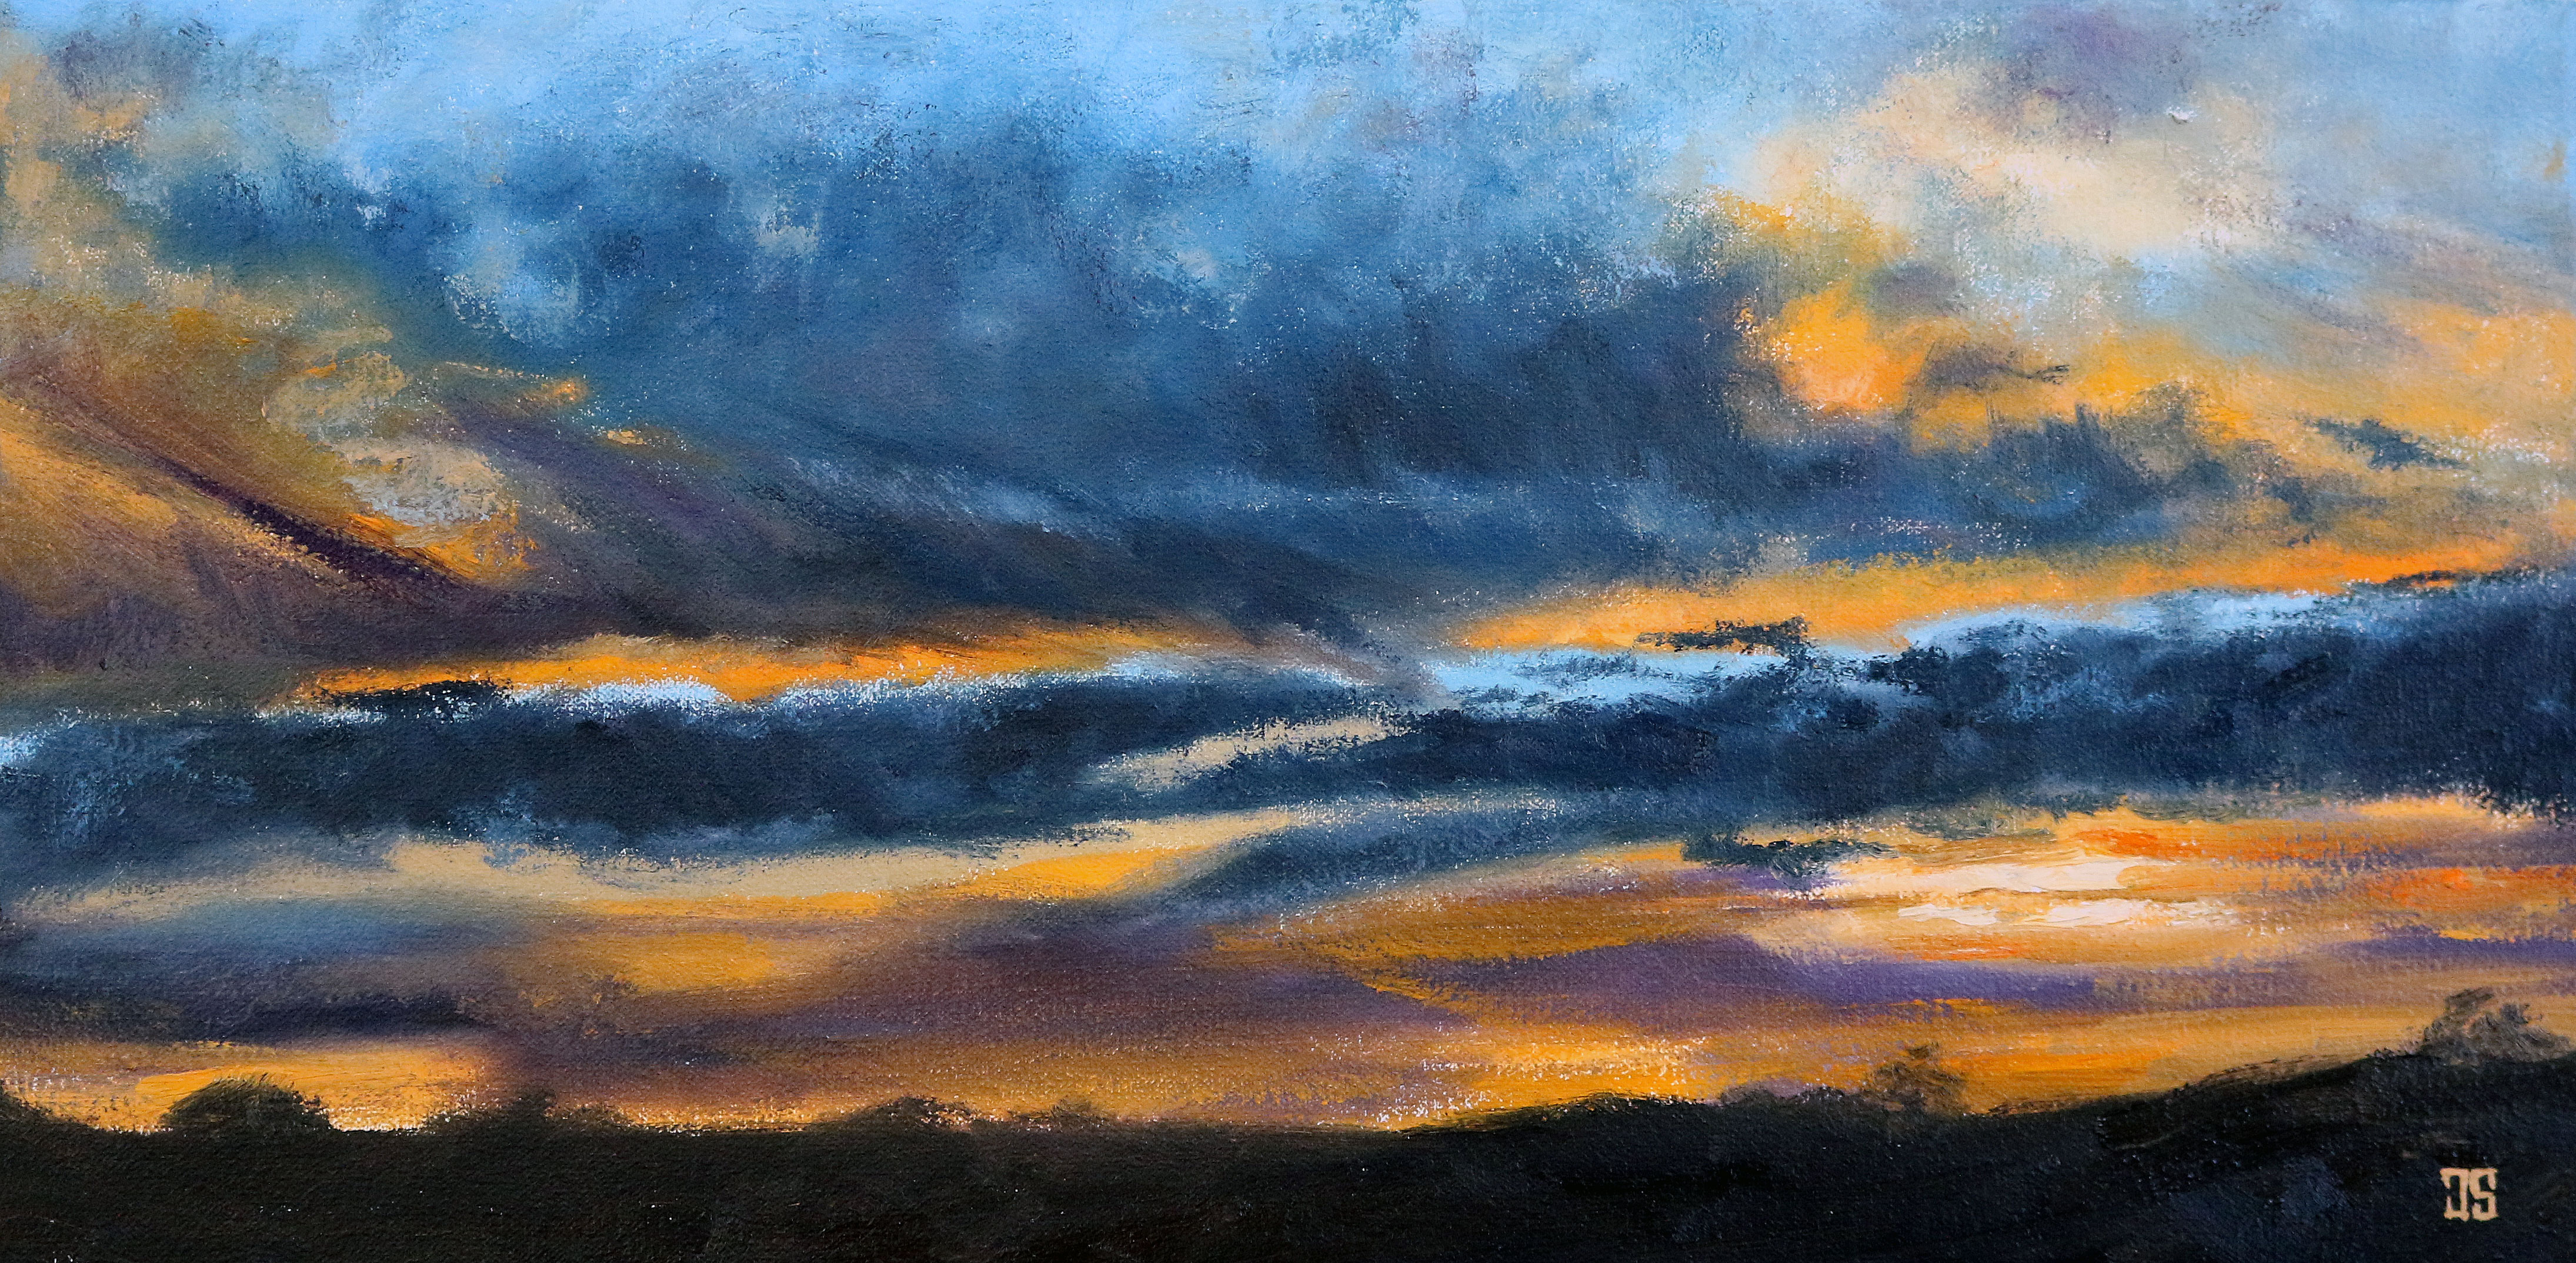 Oil painting "Texas Summer Sky" by Jeffrey Dale Starr